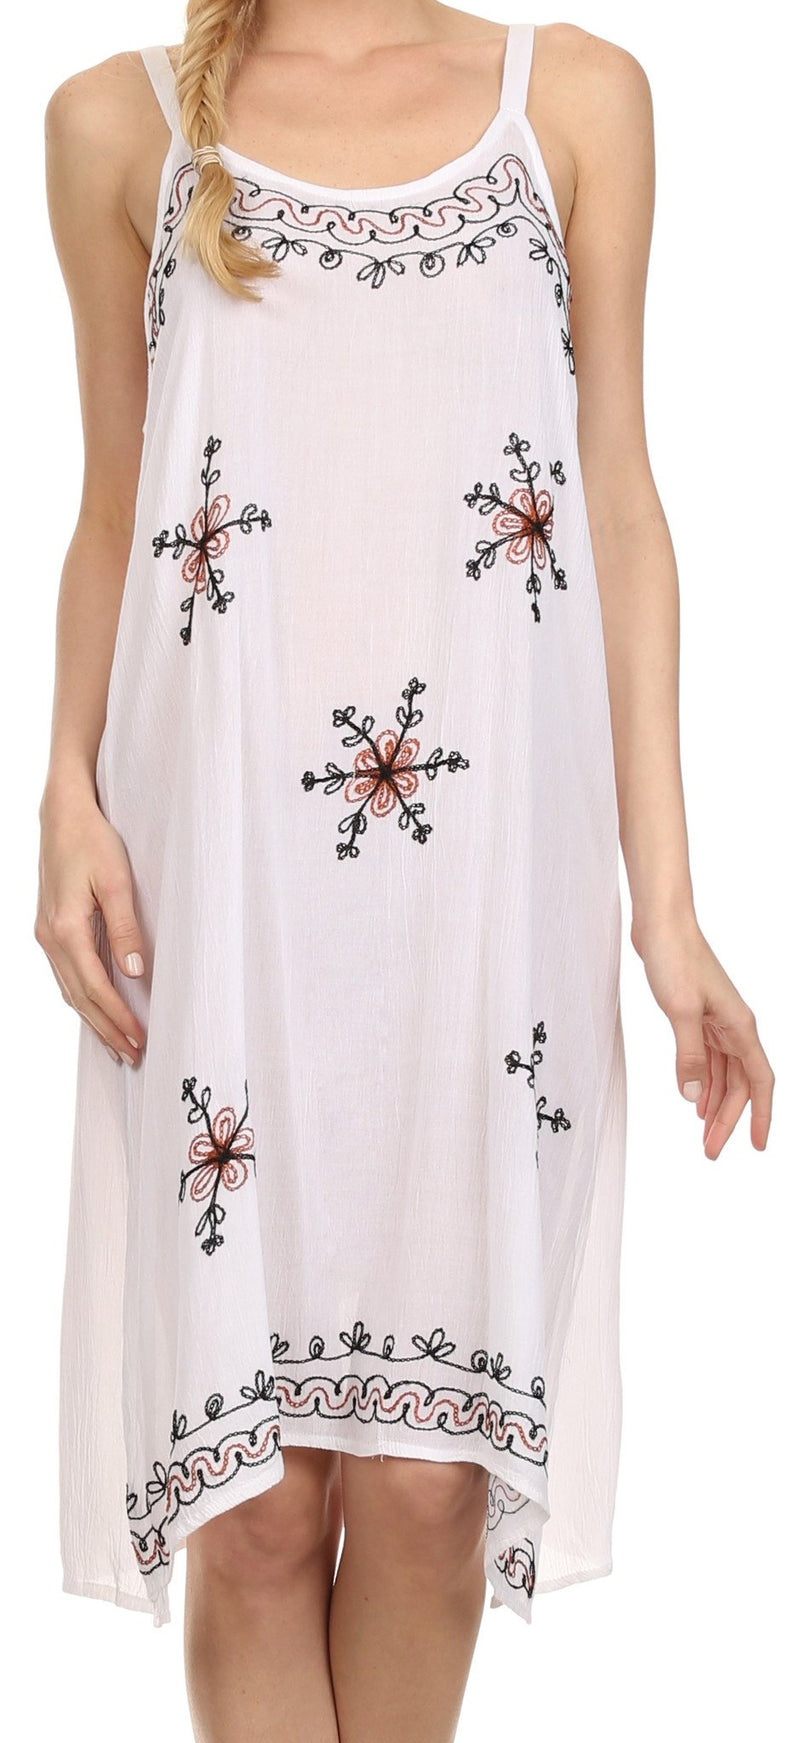 Sakkas Lucy Embroidered Hearts and Snowflakes Short Dress /Cover Up